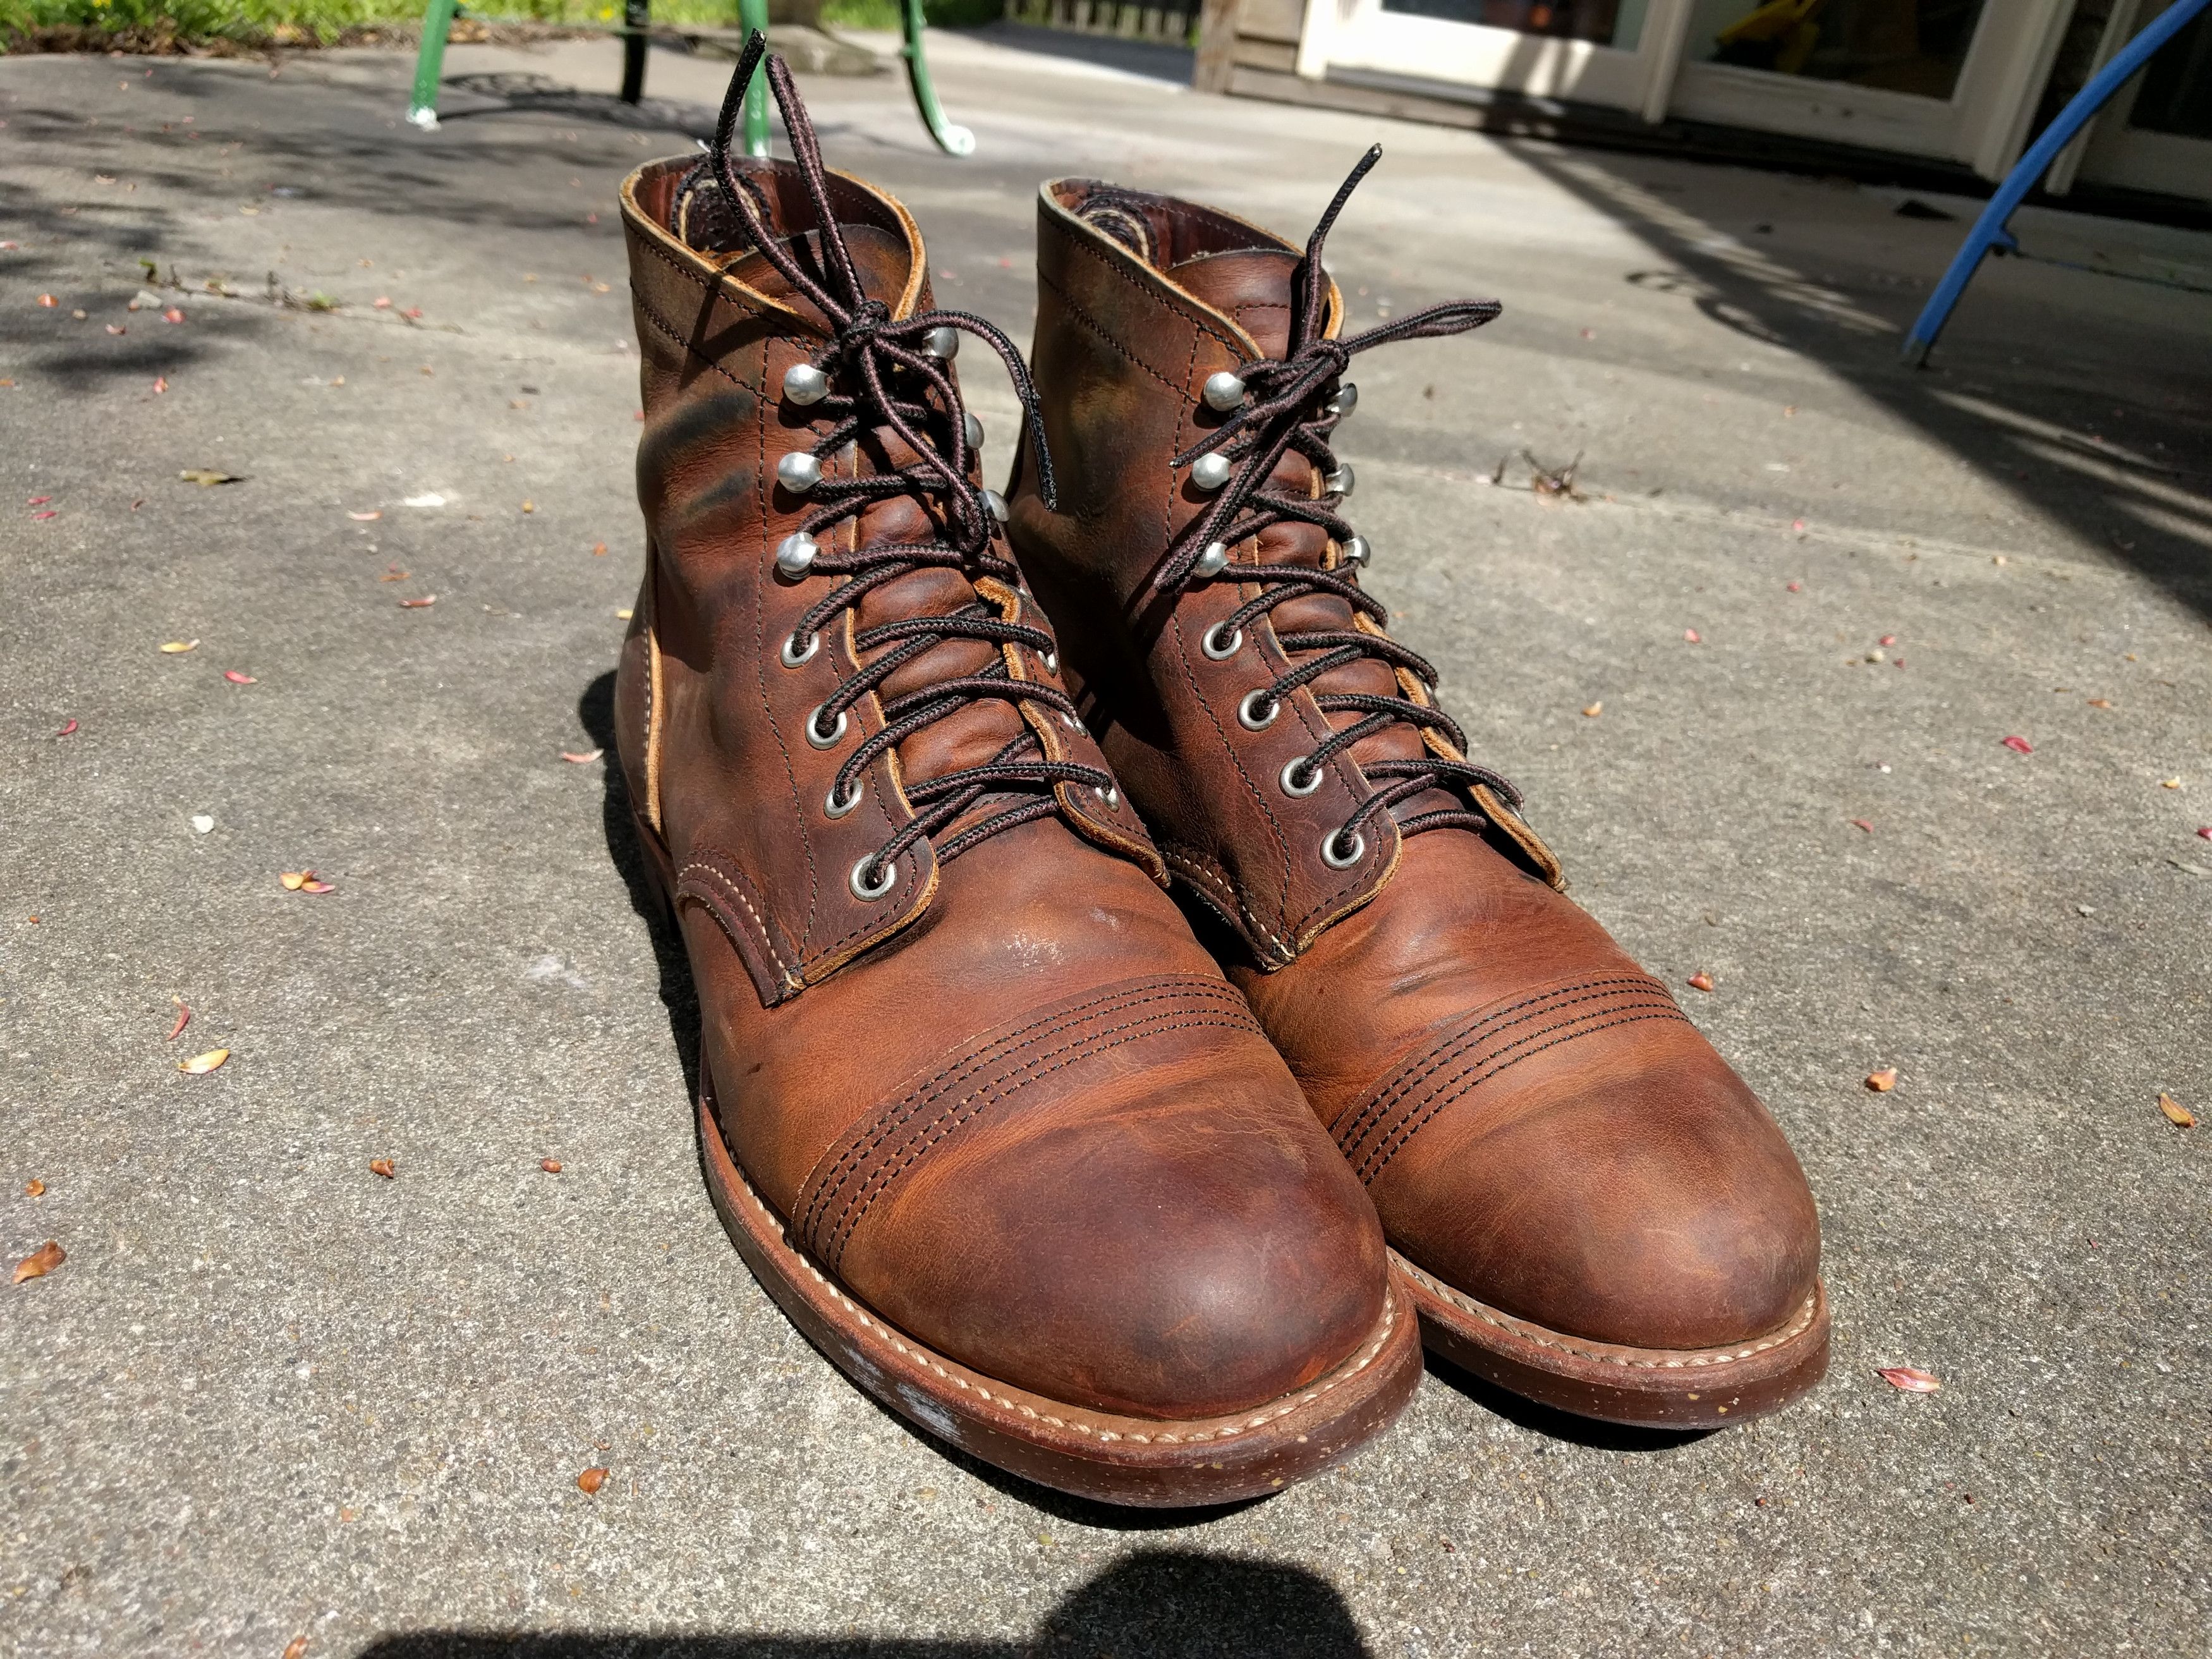 Modig auktion Traktor Red Wing Iron Ranger 8115 - Copper Rough and Tough | Grailed